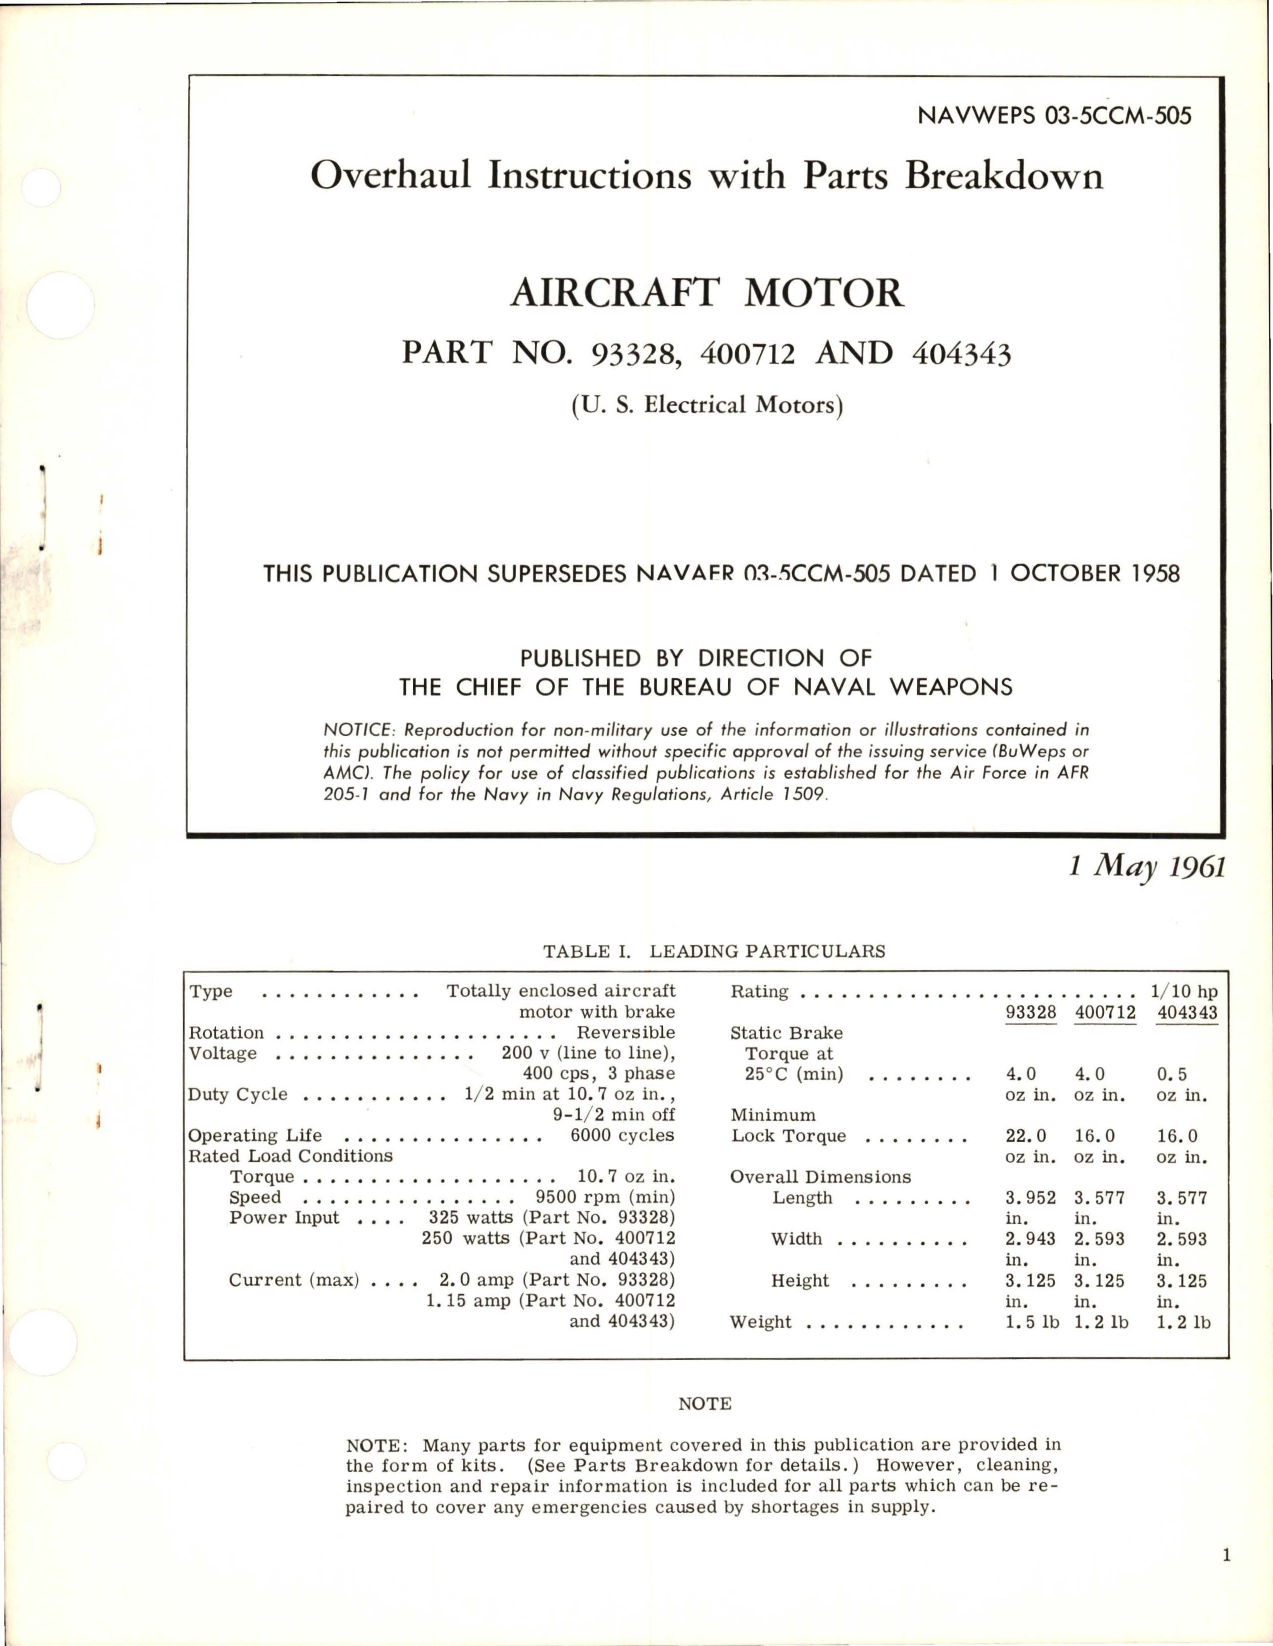 Sample page 1 from AirCorps Library document: Overhaul Instructions with Parts Breakdown for Aircraft Motor - Part 93328, 400712, and 404343